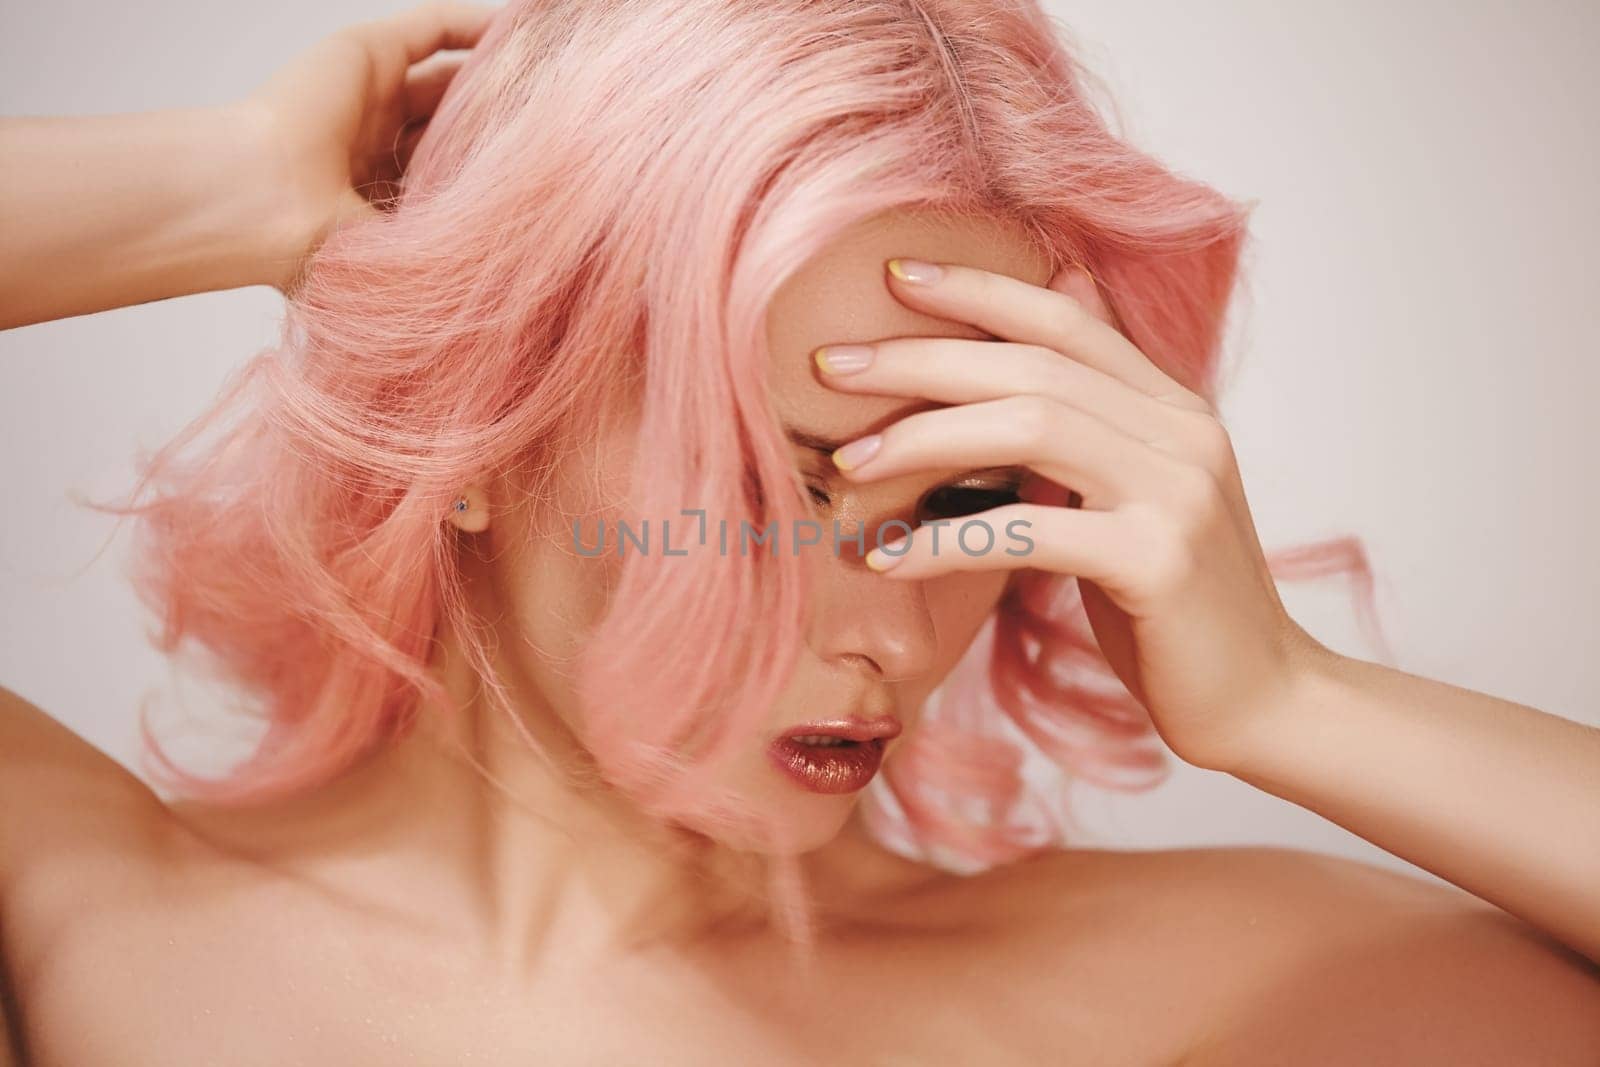 Soft-Girl with Trend Blond Pink Flying Hair, Fashion Make-up. Flying Hairstyle with Coloring. by MarinaFrost